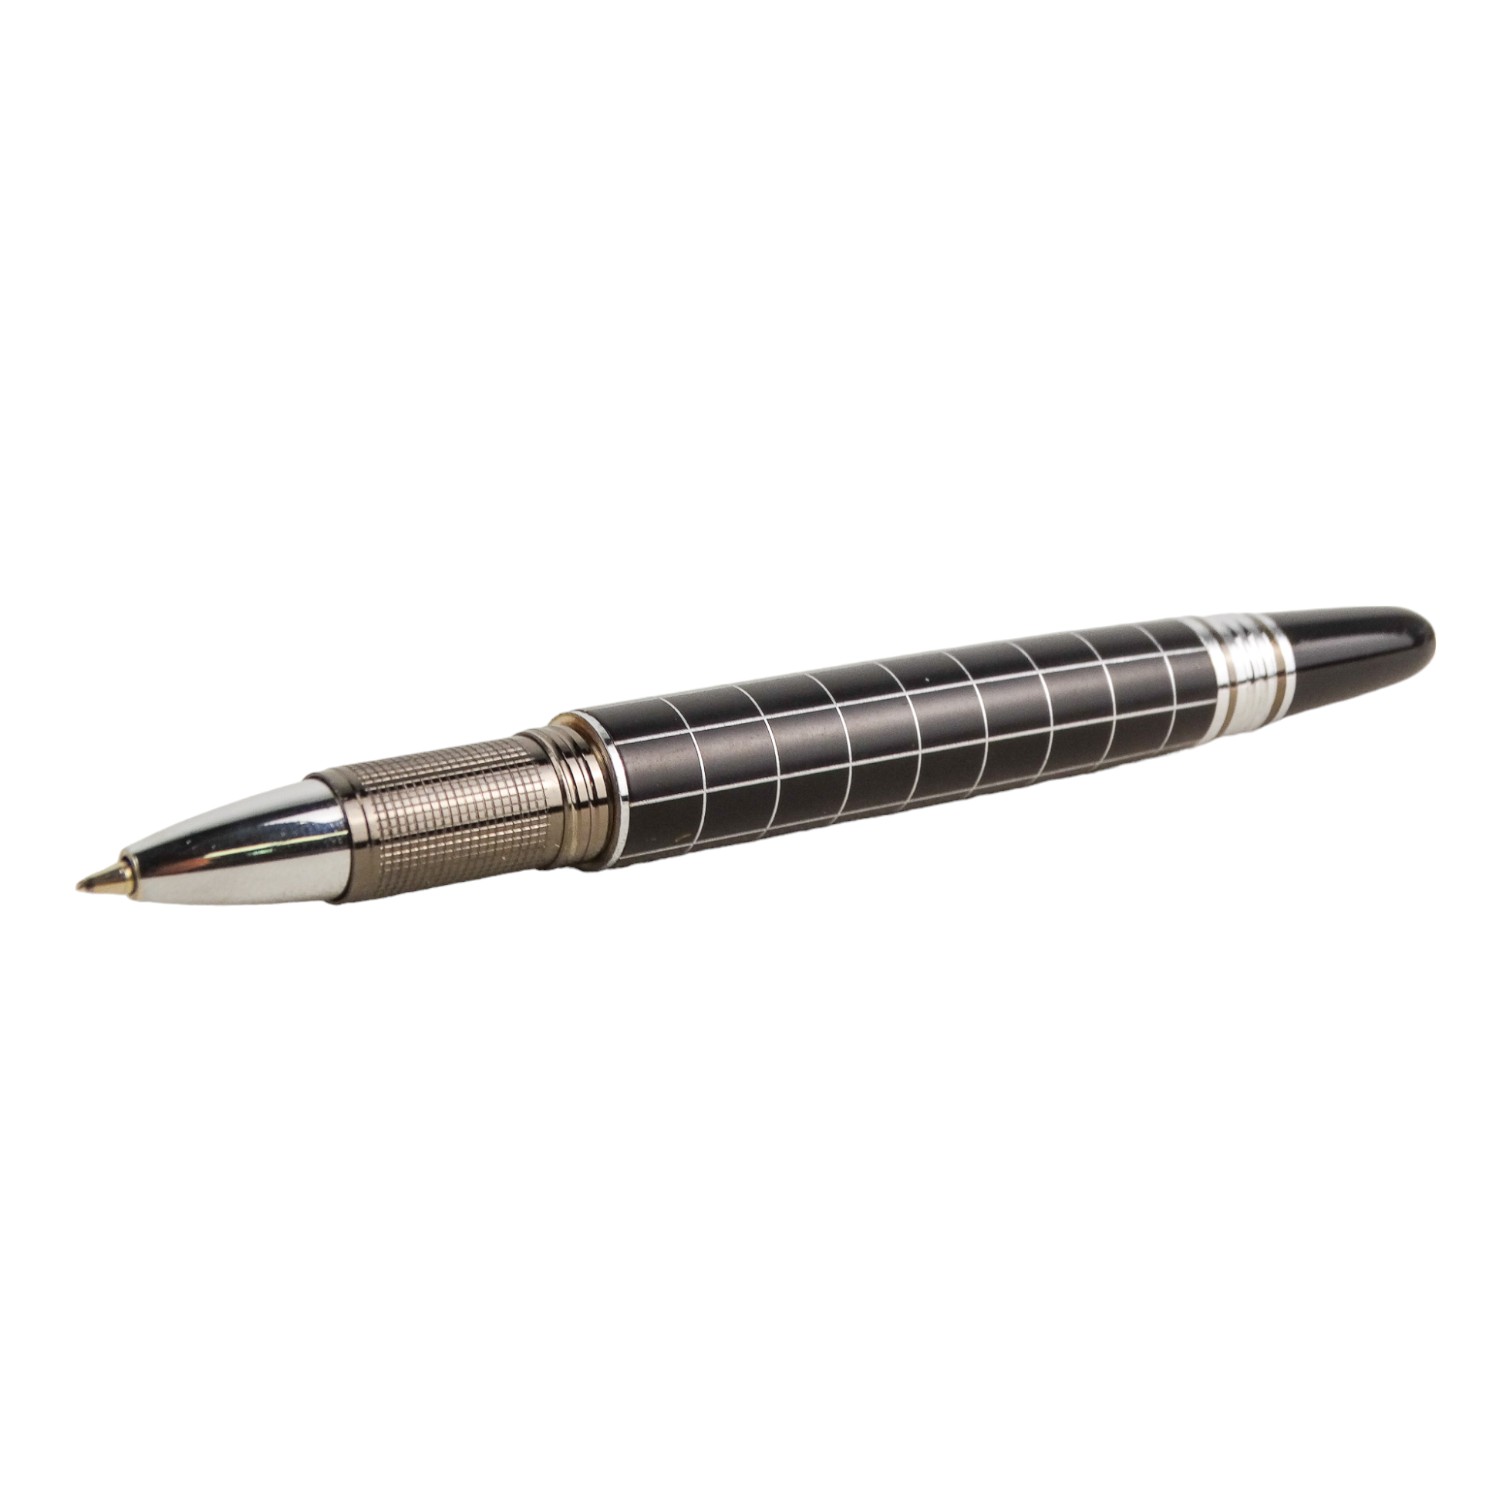 A Mont Blanc rollerball Star Walker pen - Image 3 of 6